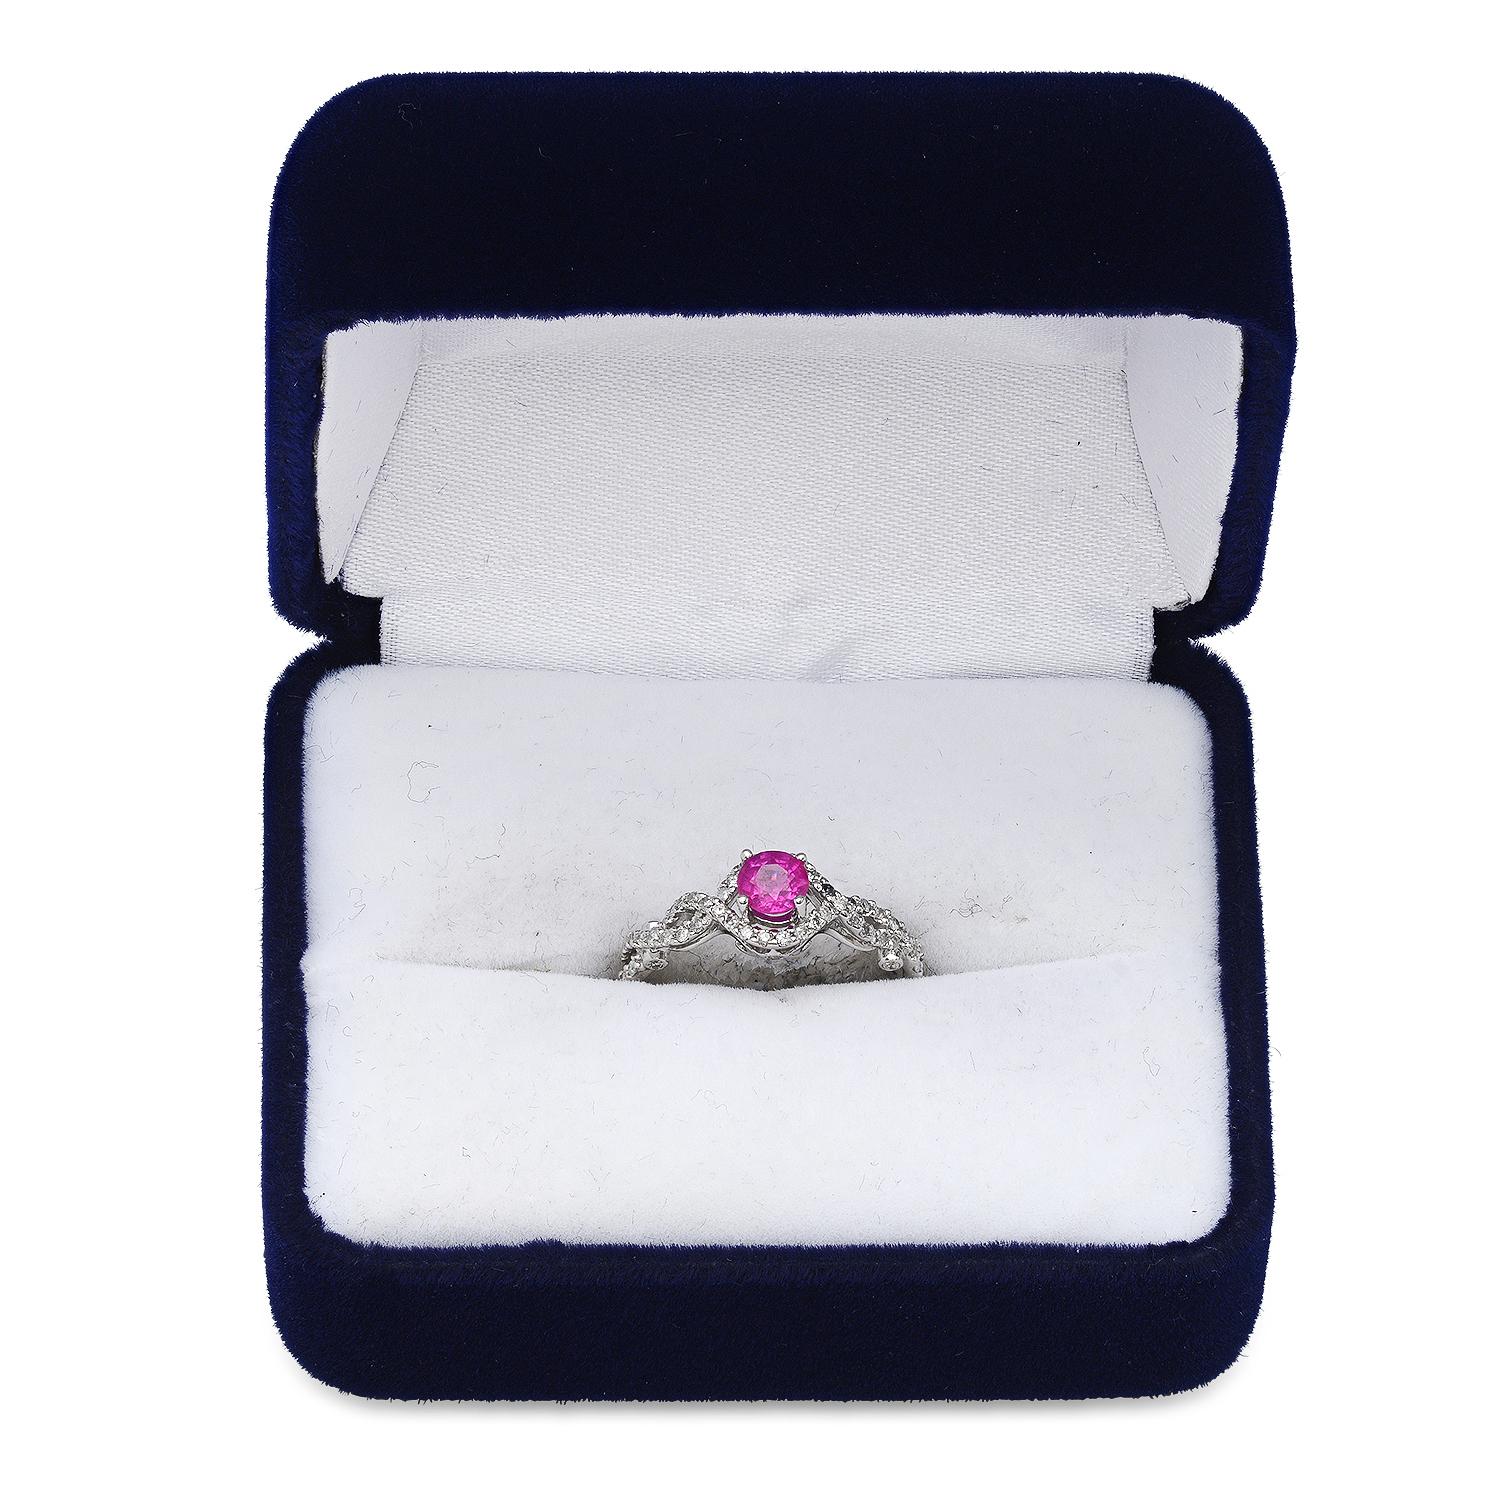 14K White Gold Setting with 0.35ct Ruby and 0.28ct Diamond Ladies Ring